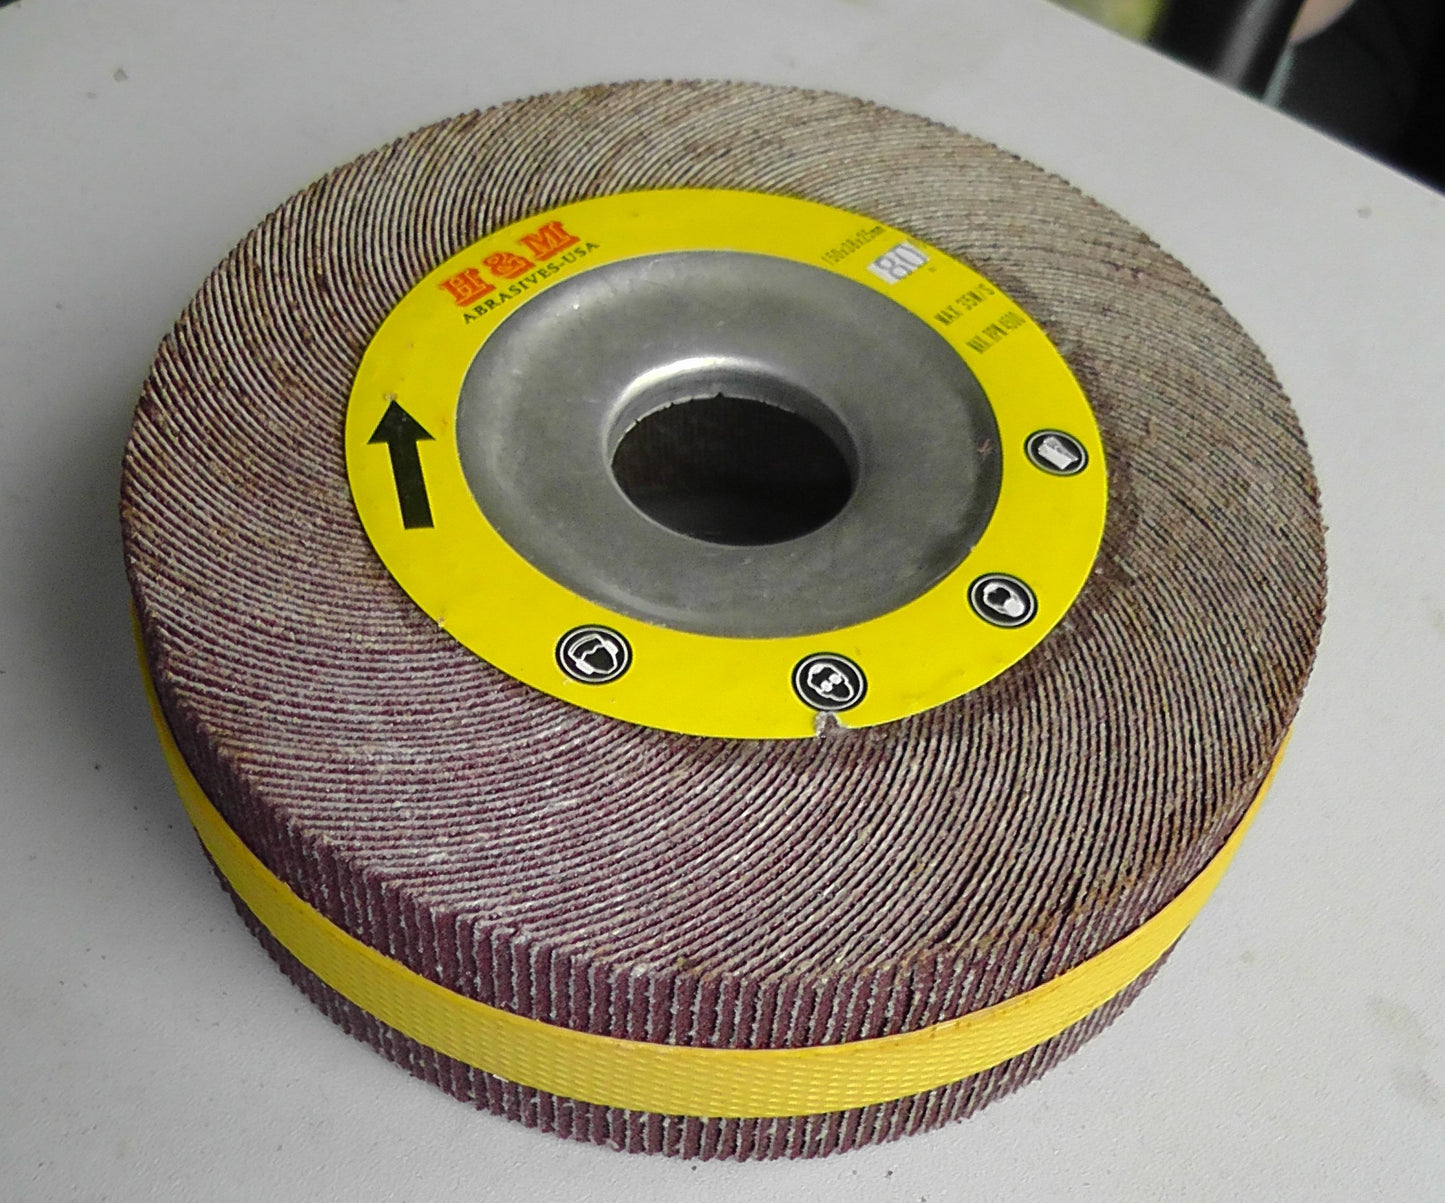 Premium Flap Wheel 6" x 1" with 1" bore Unmounted 120 grit